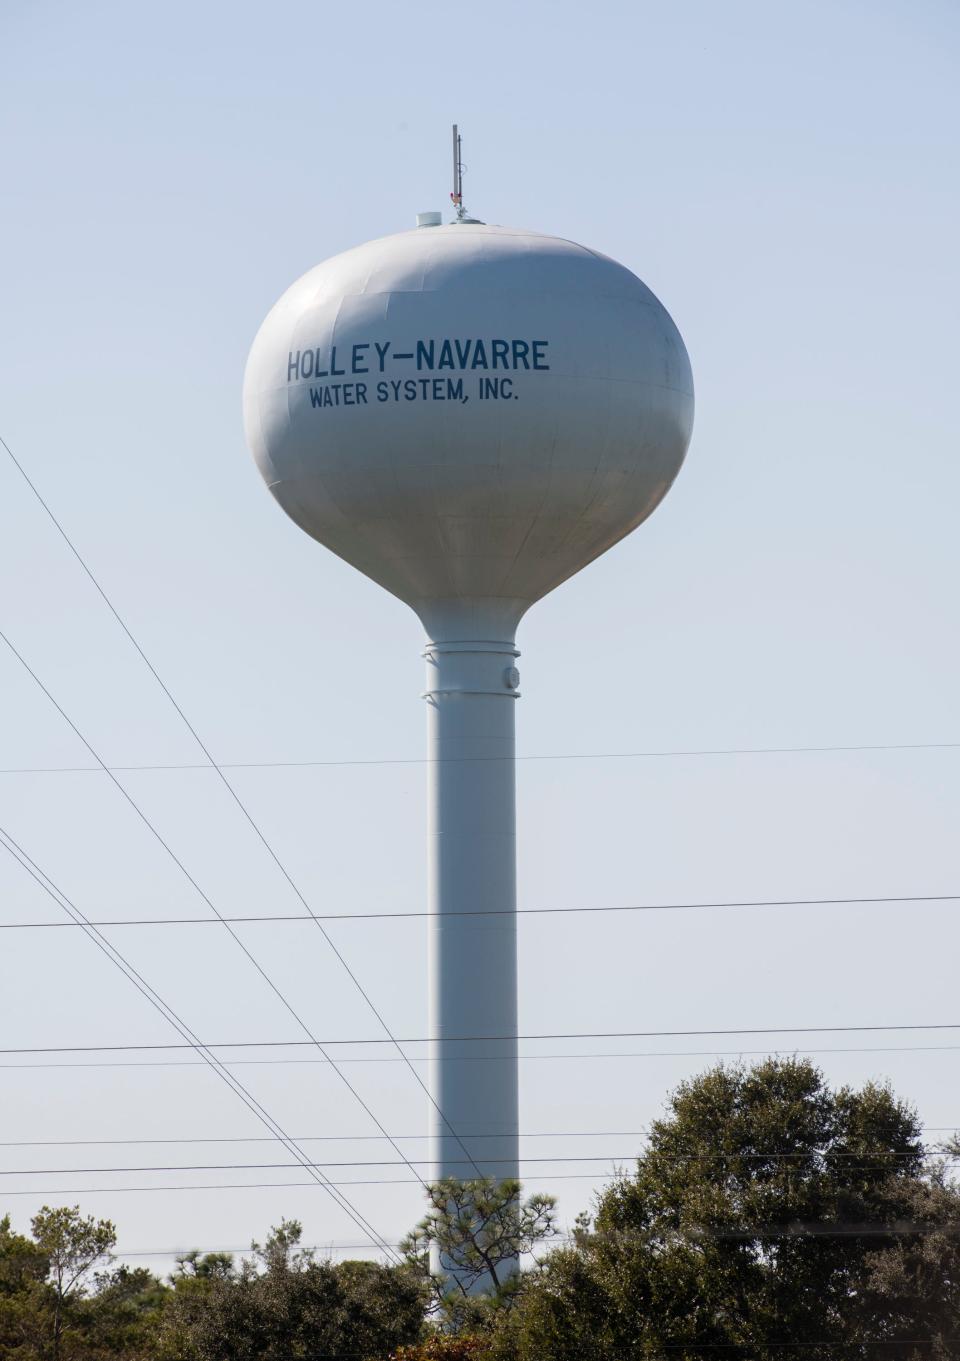 The Holley-Navarre Water System plans to request bids on an organization-wide forensic audit of the time former CEO Dallas Peavey was in the position.